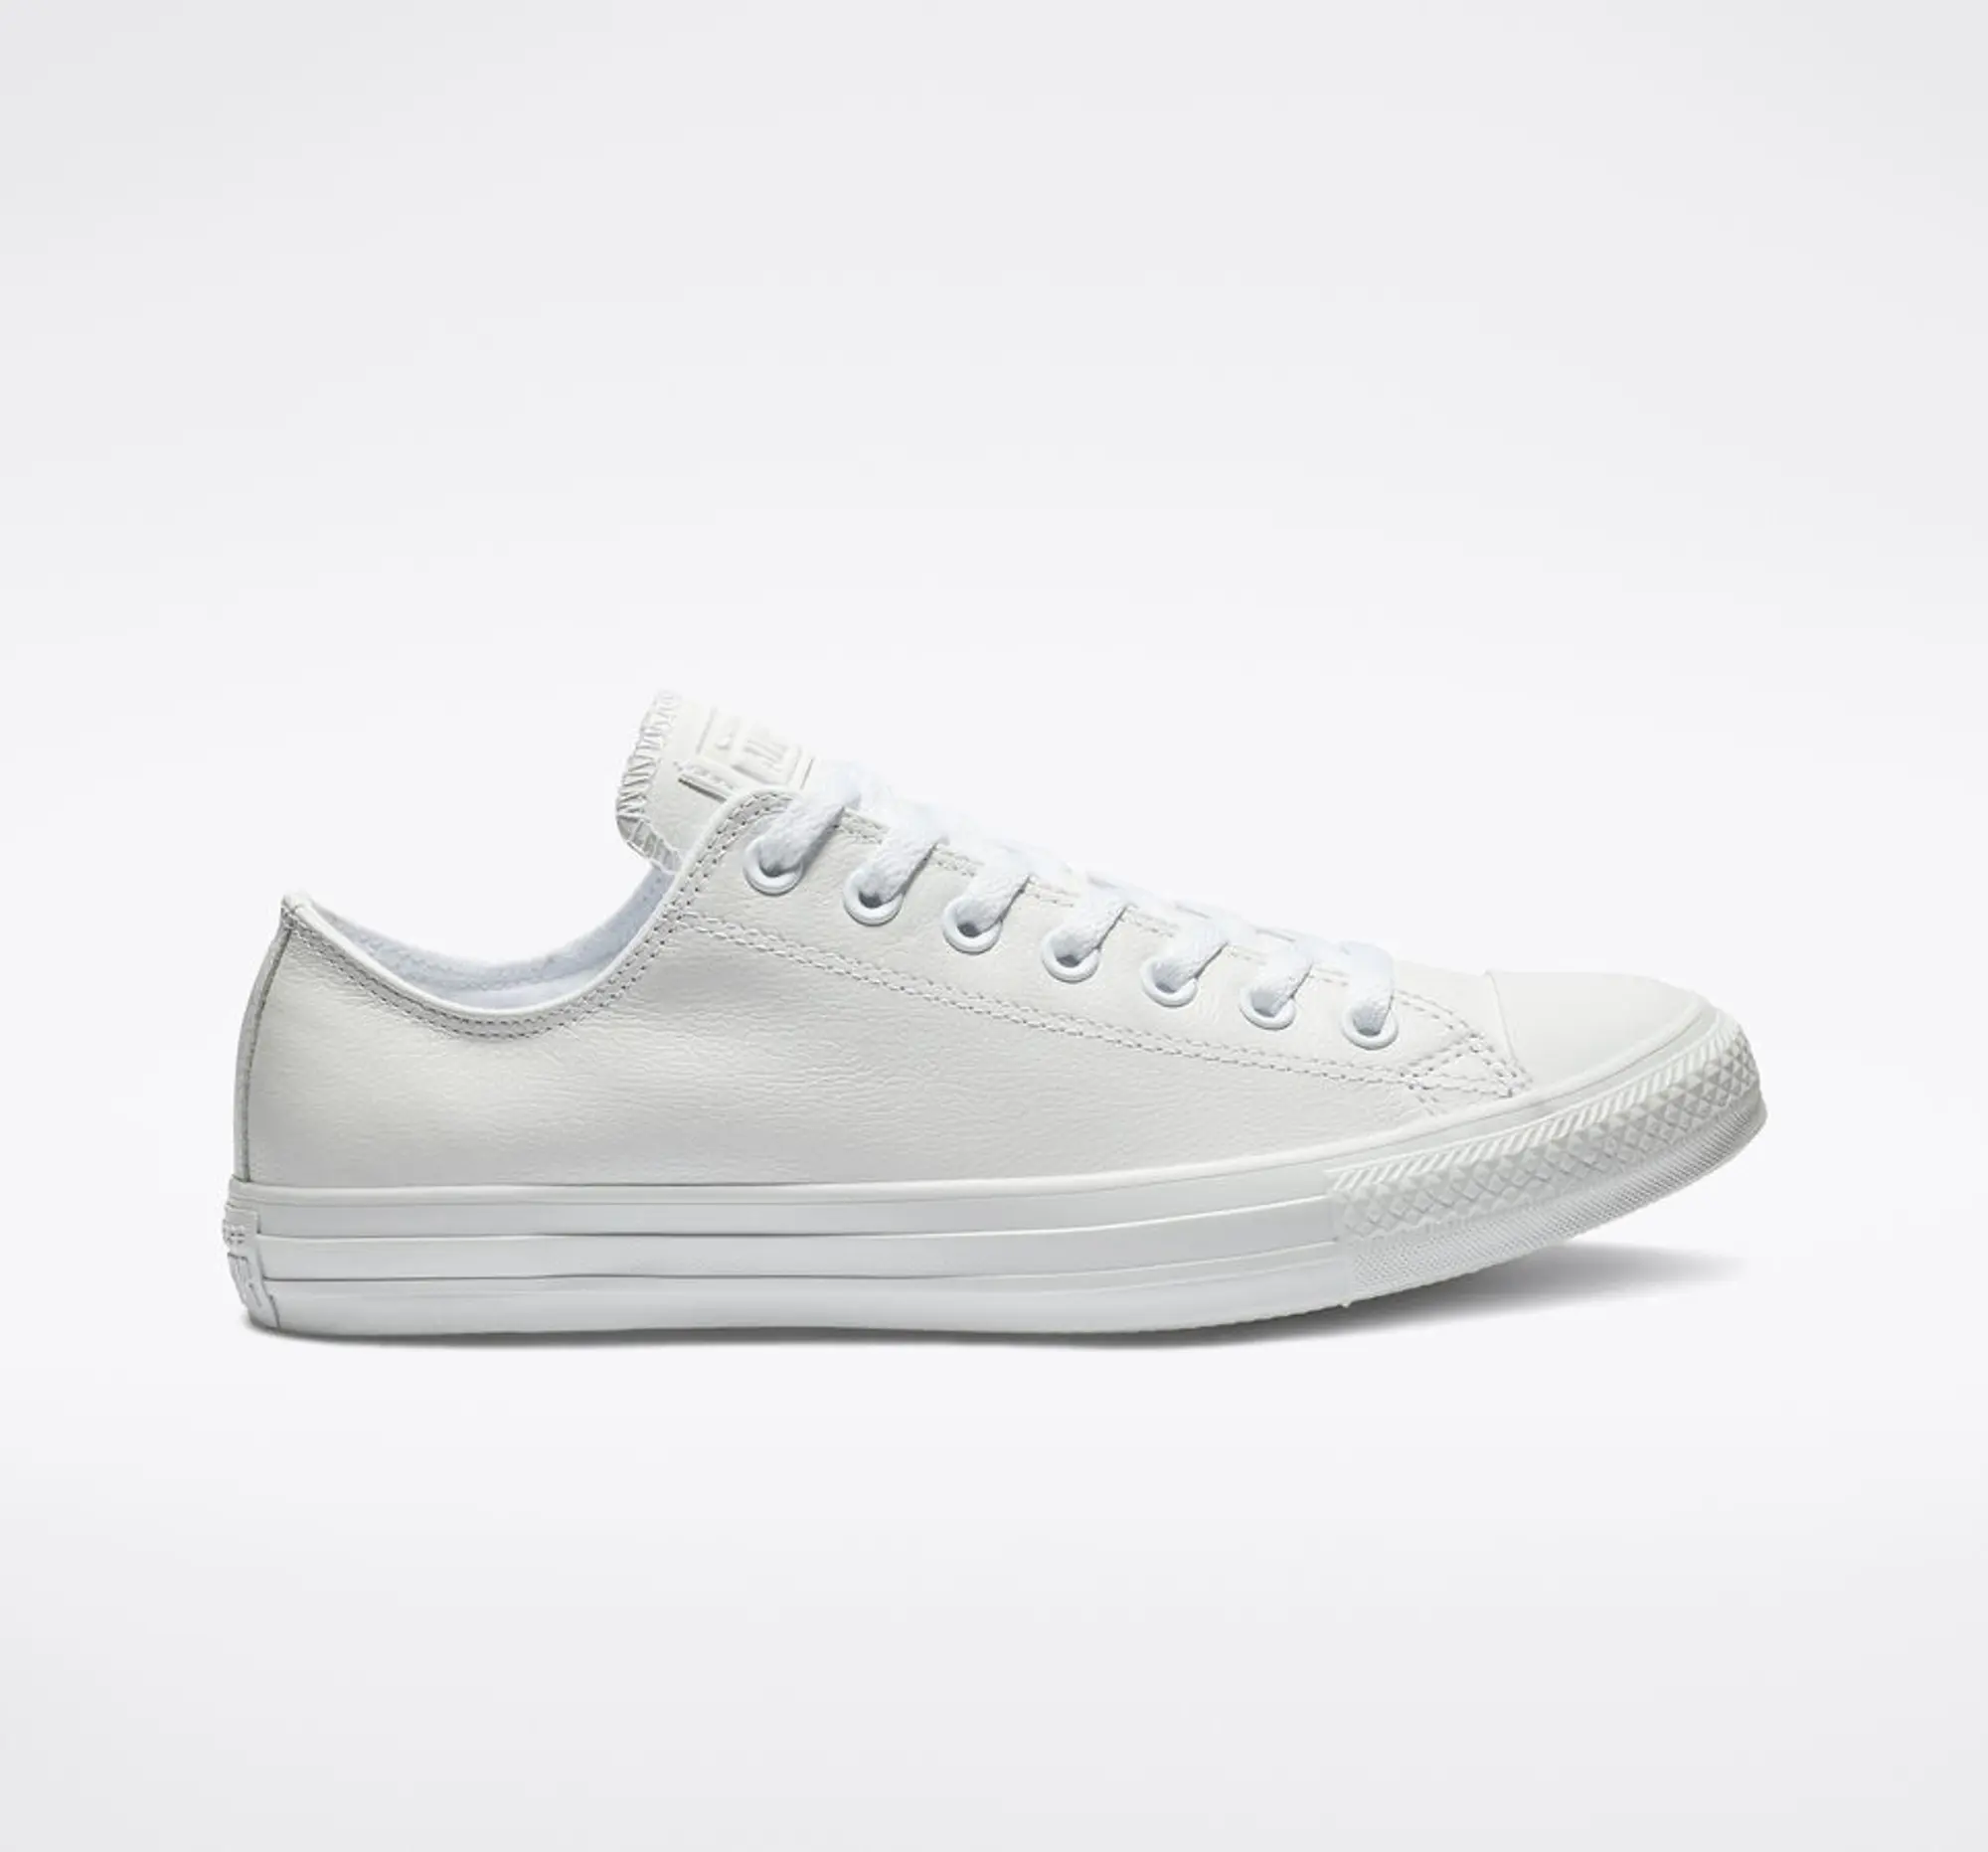 Converse Womens Chuck Taylor All Star Ox Leather Mono Trainer - White